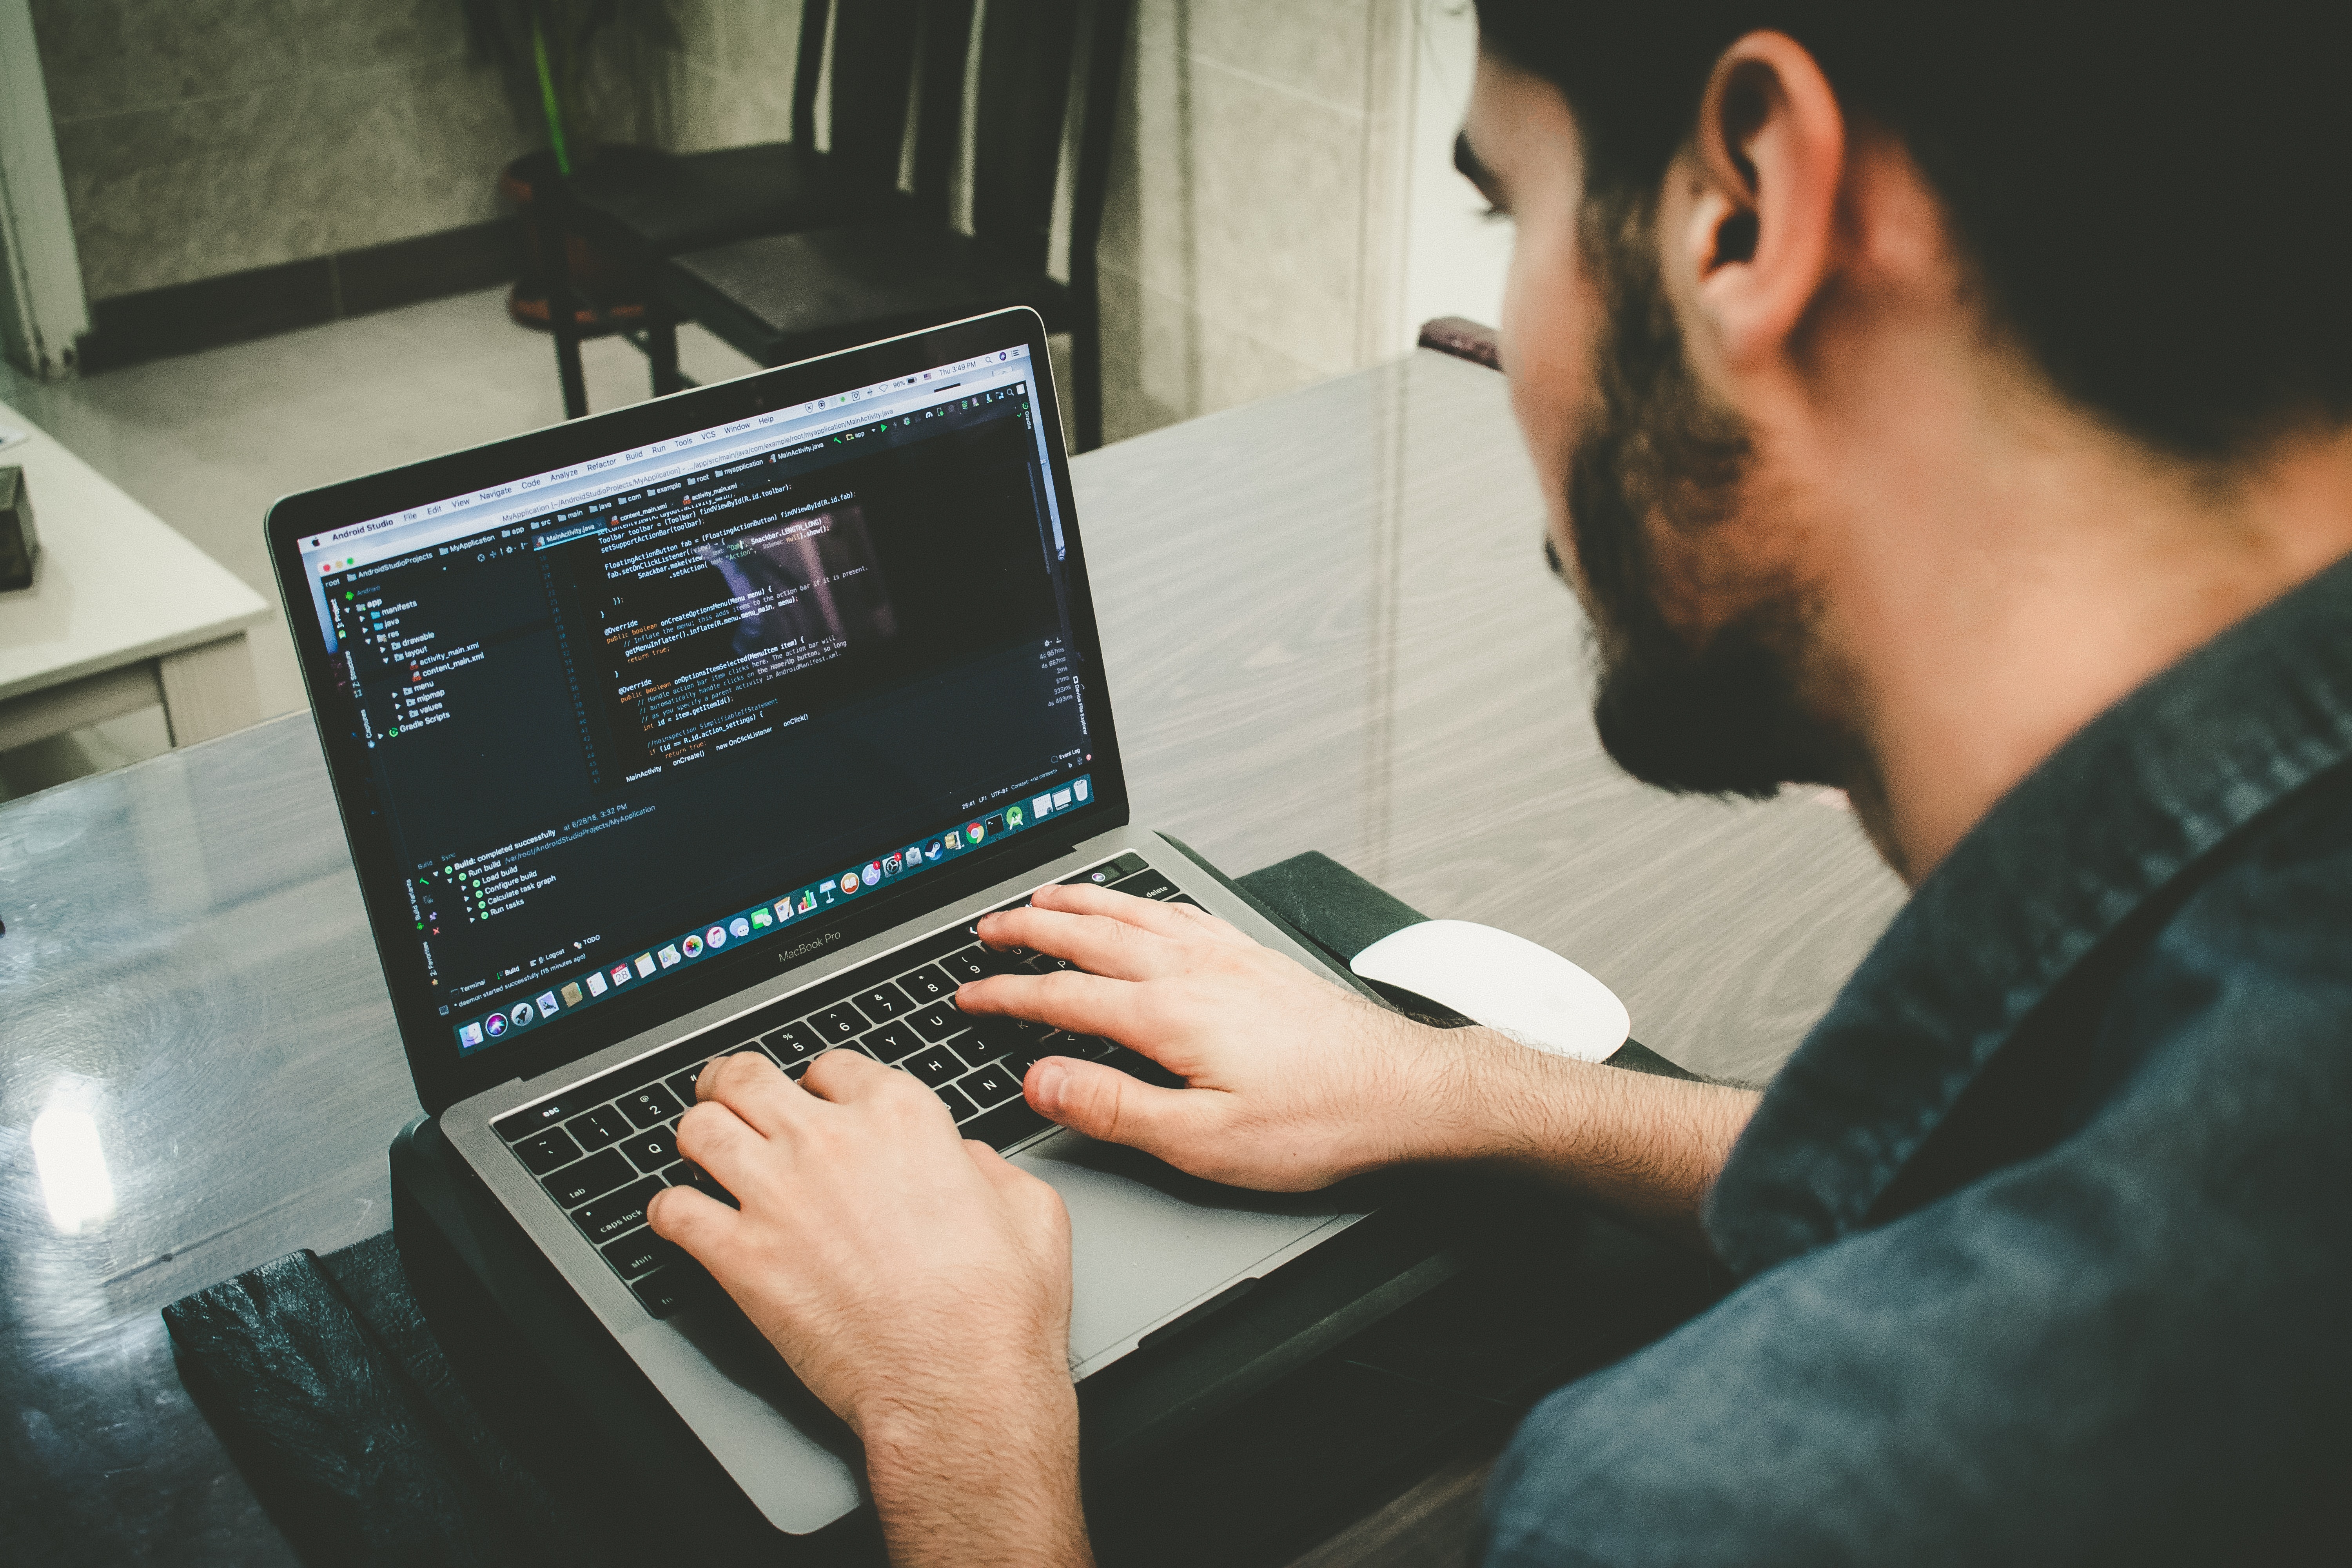 Photo of someone working on a code on a computer by Daniel Igdery on Unsplash